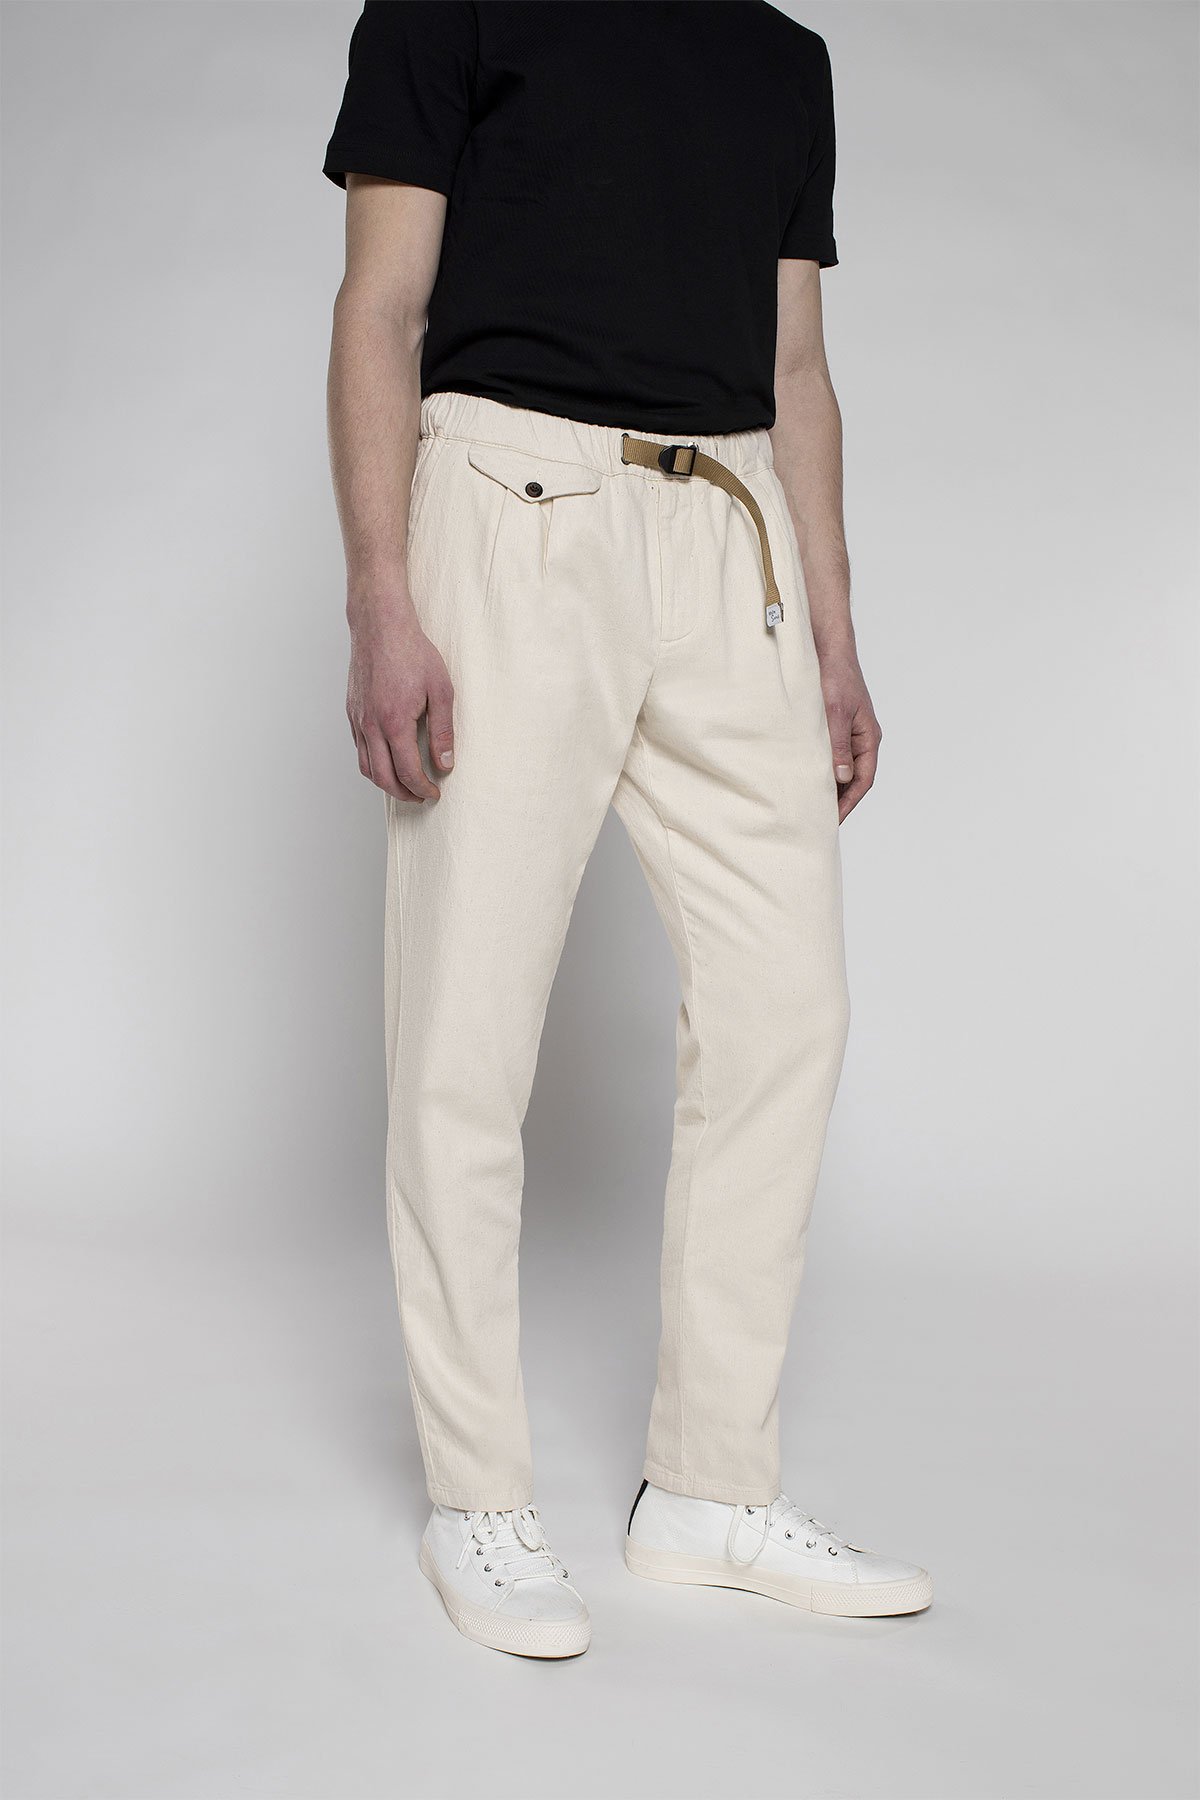 Pants with Pinces - White Sand